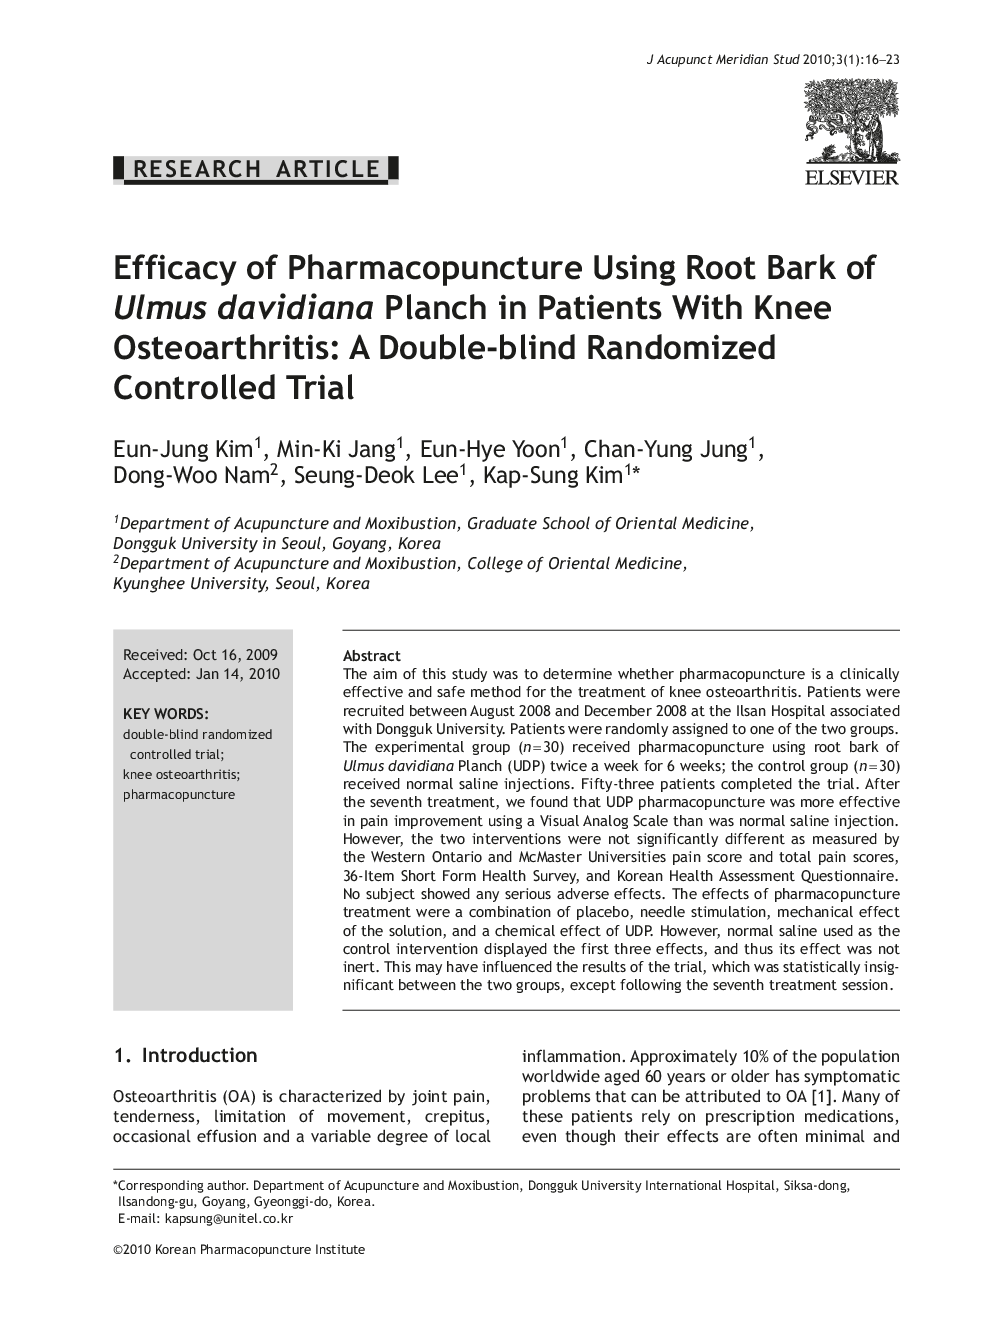 Efficacy of Pharmacopuncture Using Root Bark of Ulmus davidiana Planch in Patients With Knee Osteoarthritis: A Double-blind Randomized Controlled Trial